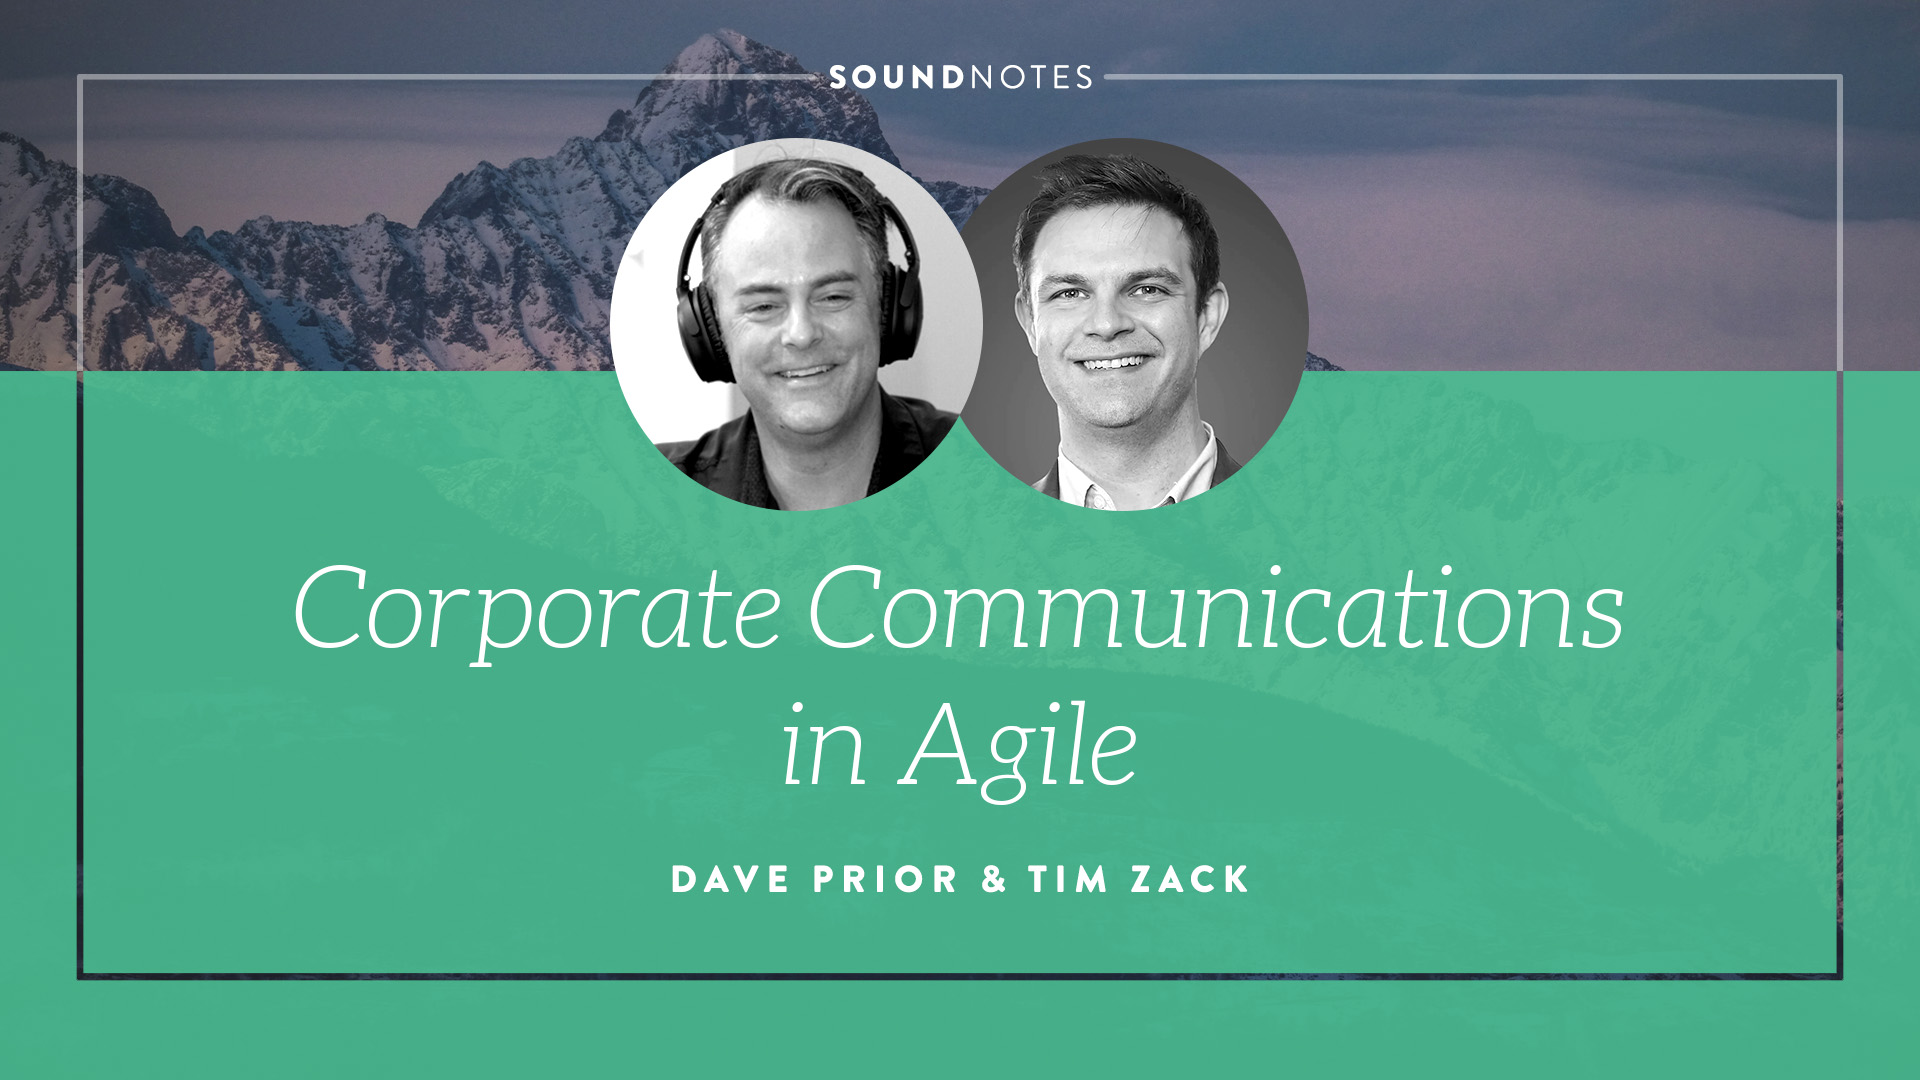 Corporate Communications in Agile with Tim Zack